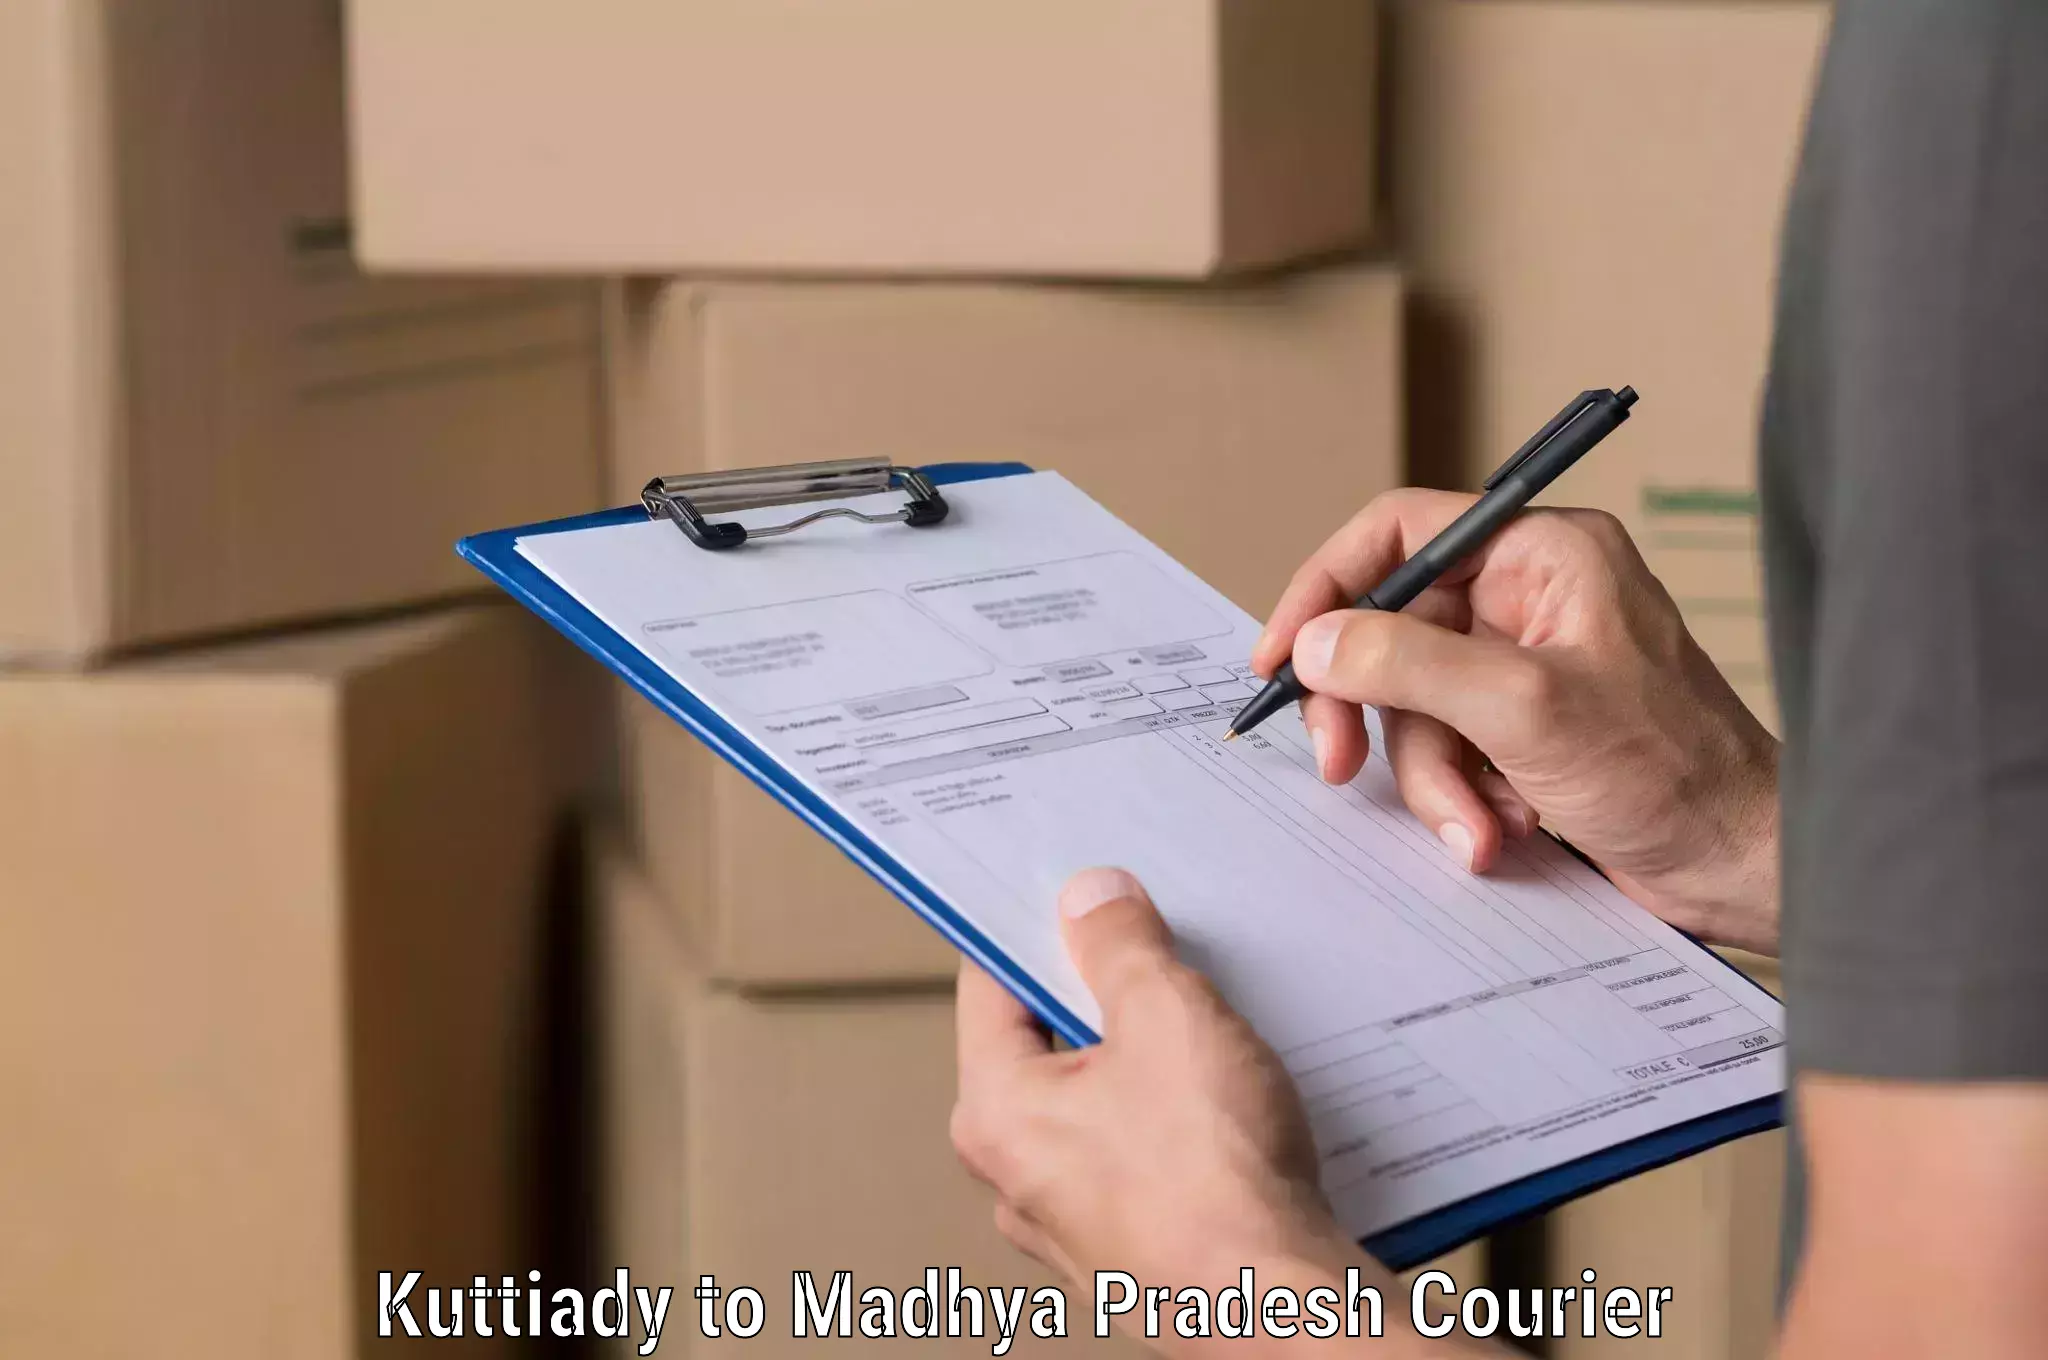 State-of-the-art courier technology Kuttiady to Chapda